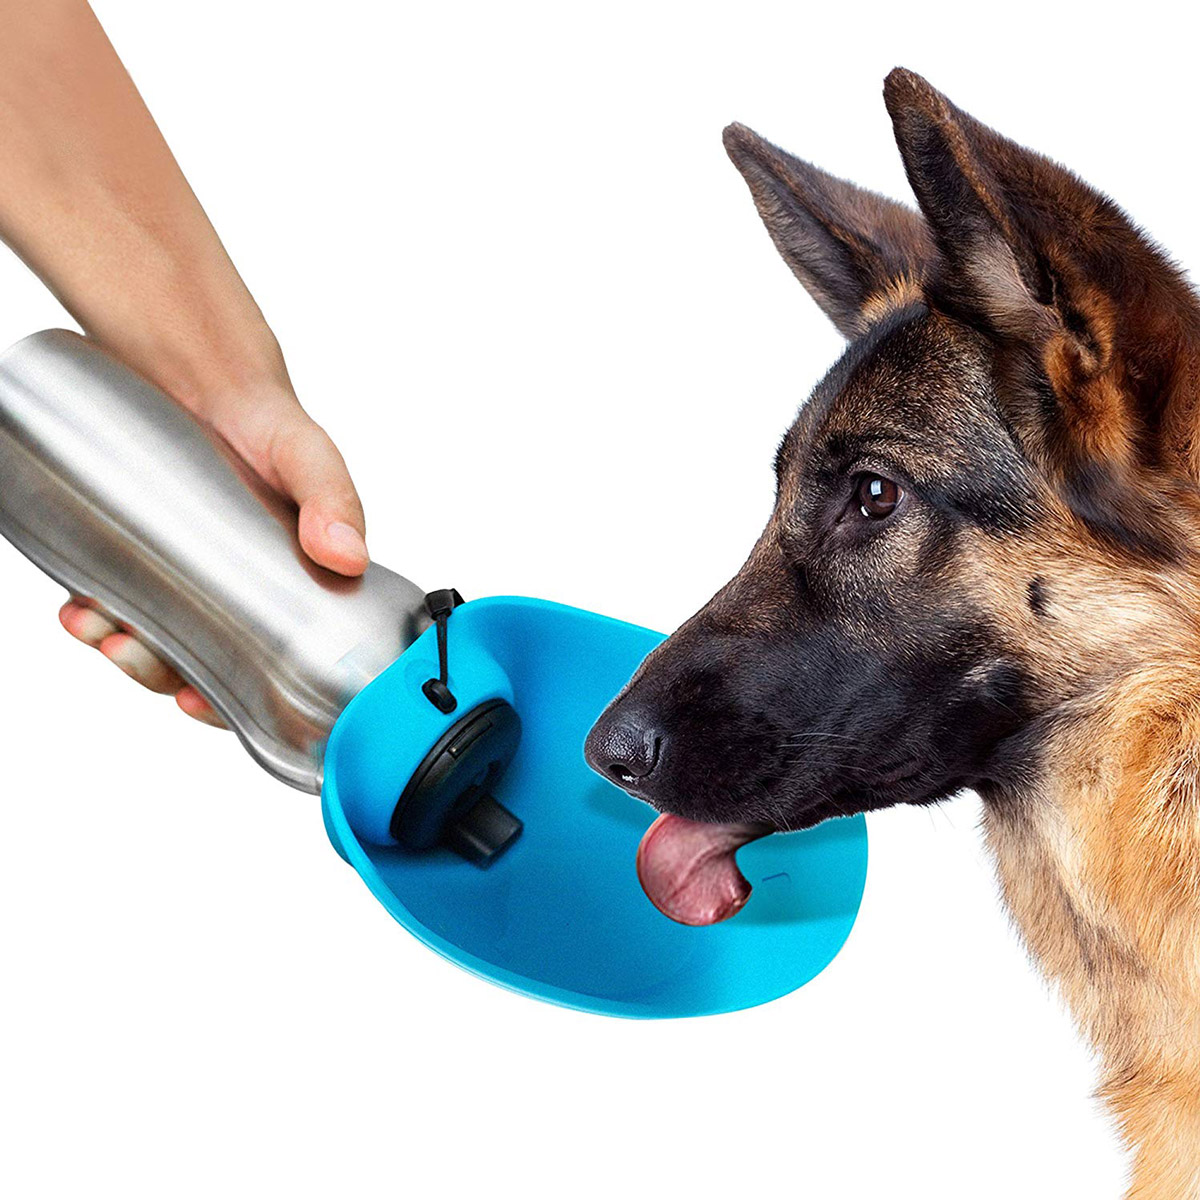 PupFlask Portable Water Bottle Portable Dog Water Bowl & Travel Water Bottle For Dogs 27 or 40 OZ Stainless Steel Convenient Dog Travel Water Bottle Keeps Pup Hydrated